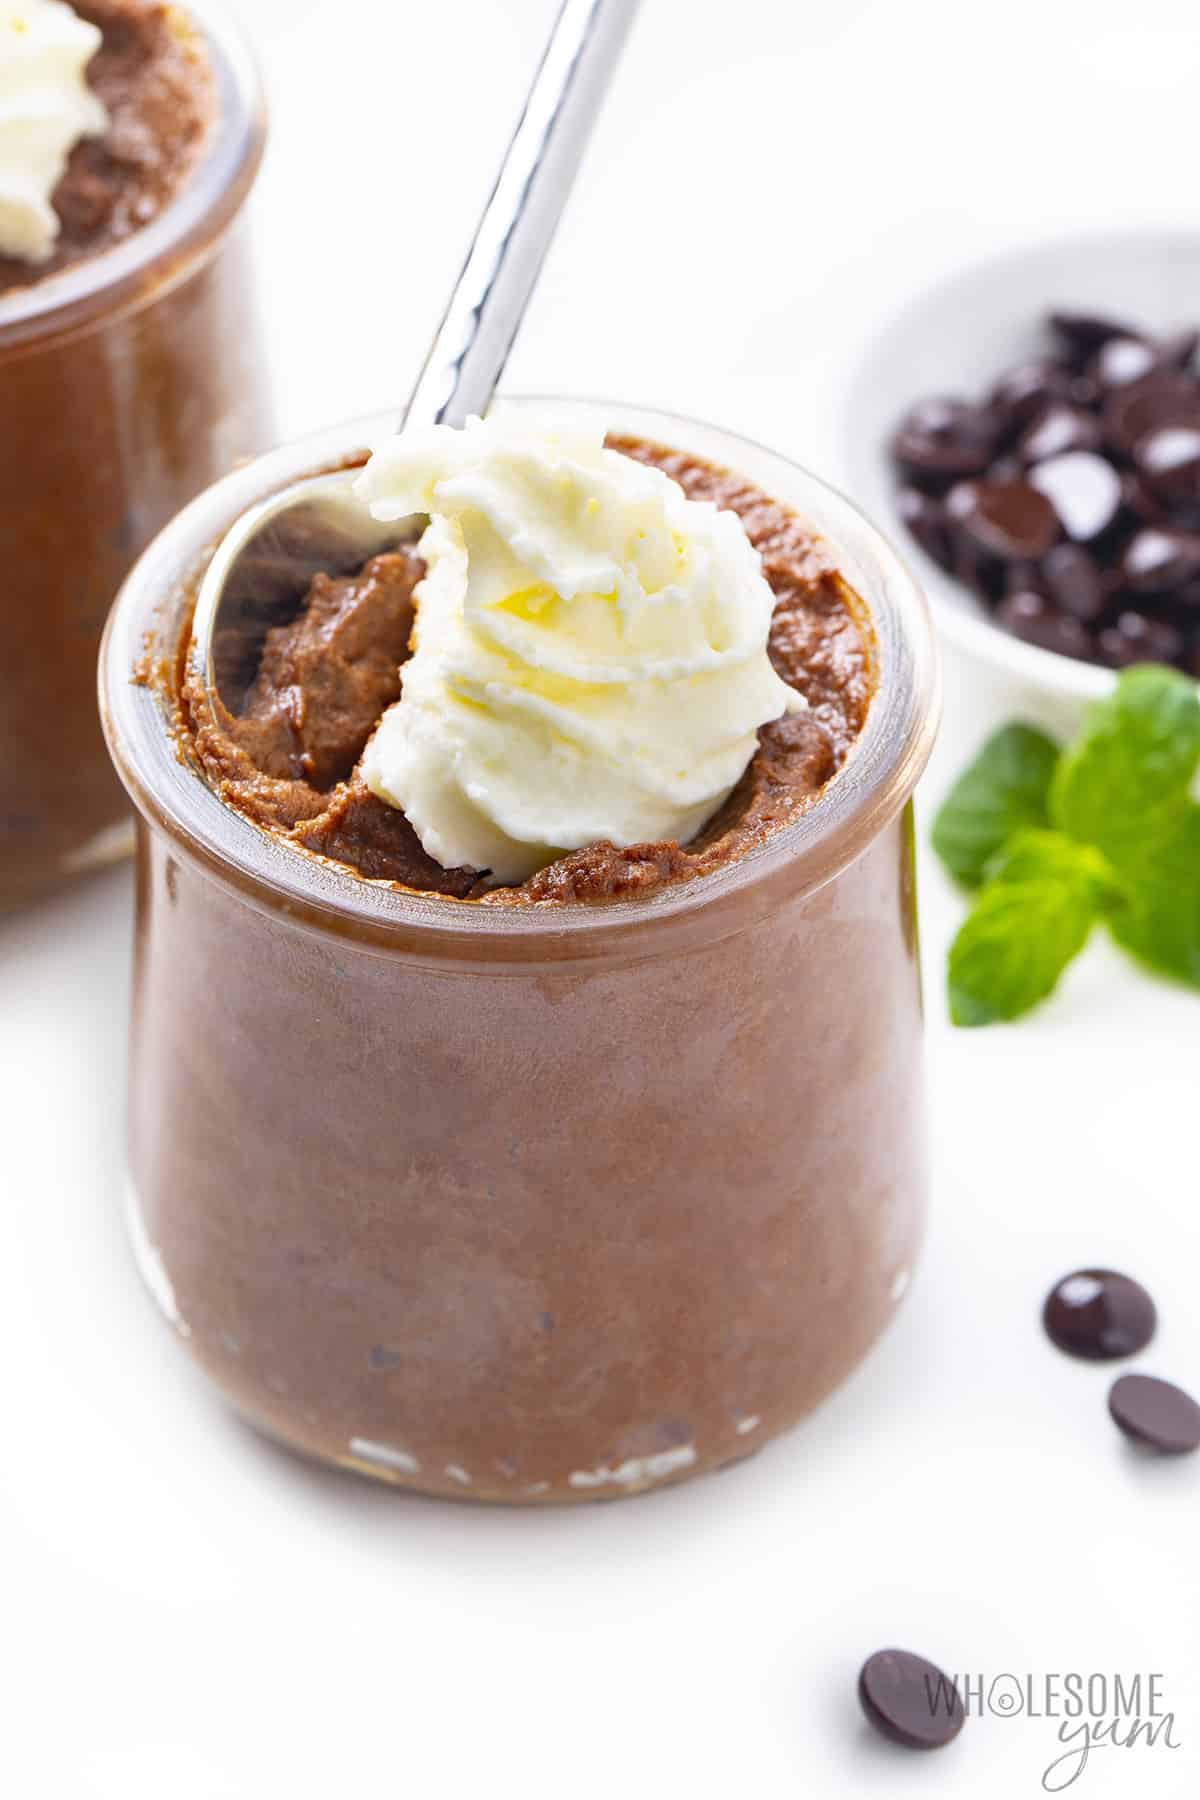 Finished low carb chocolate mousse with spoon.